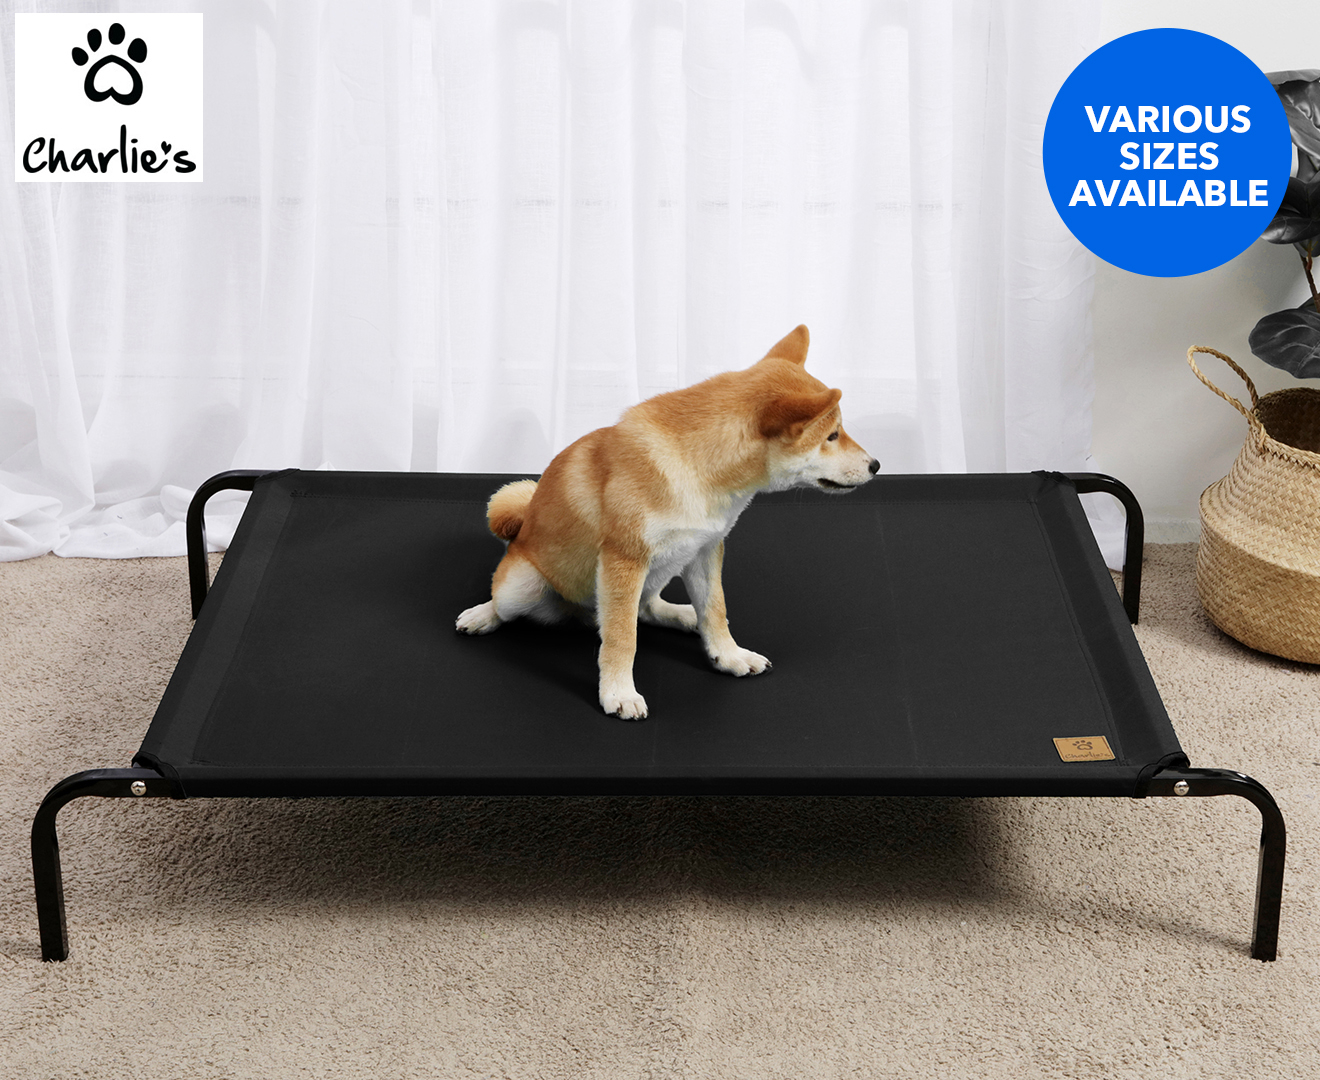 Charlie's Elevated Trampoline Pet Bed - Black | Catch.co.nz